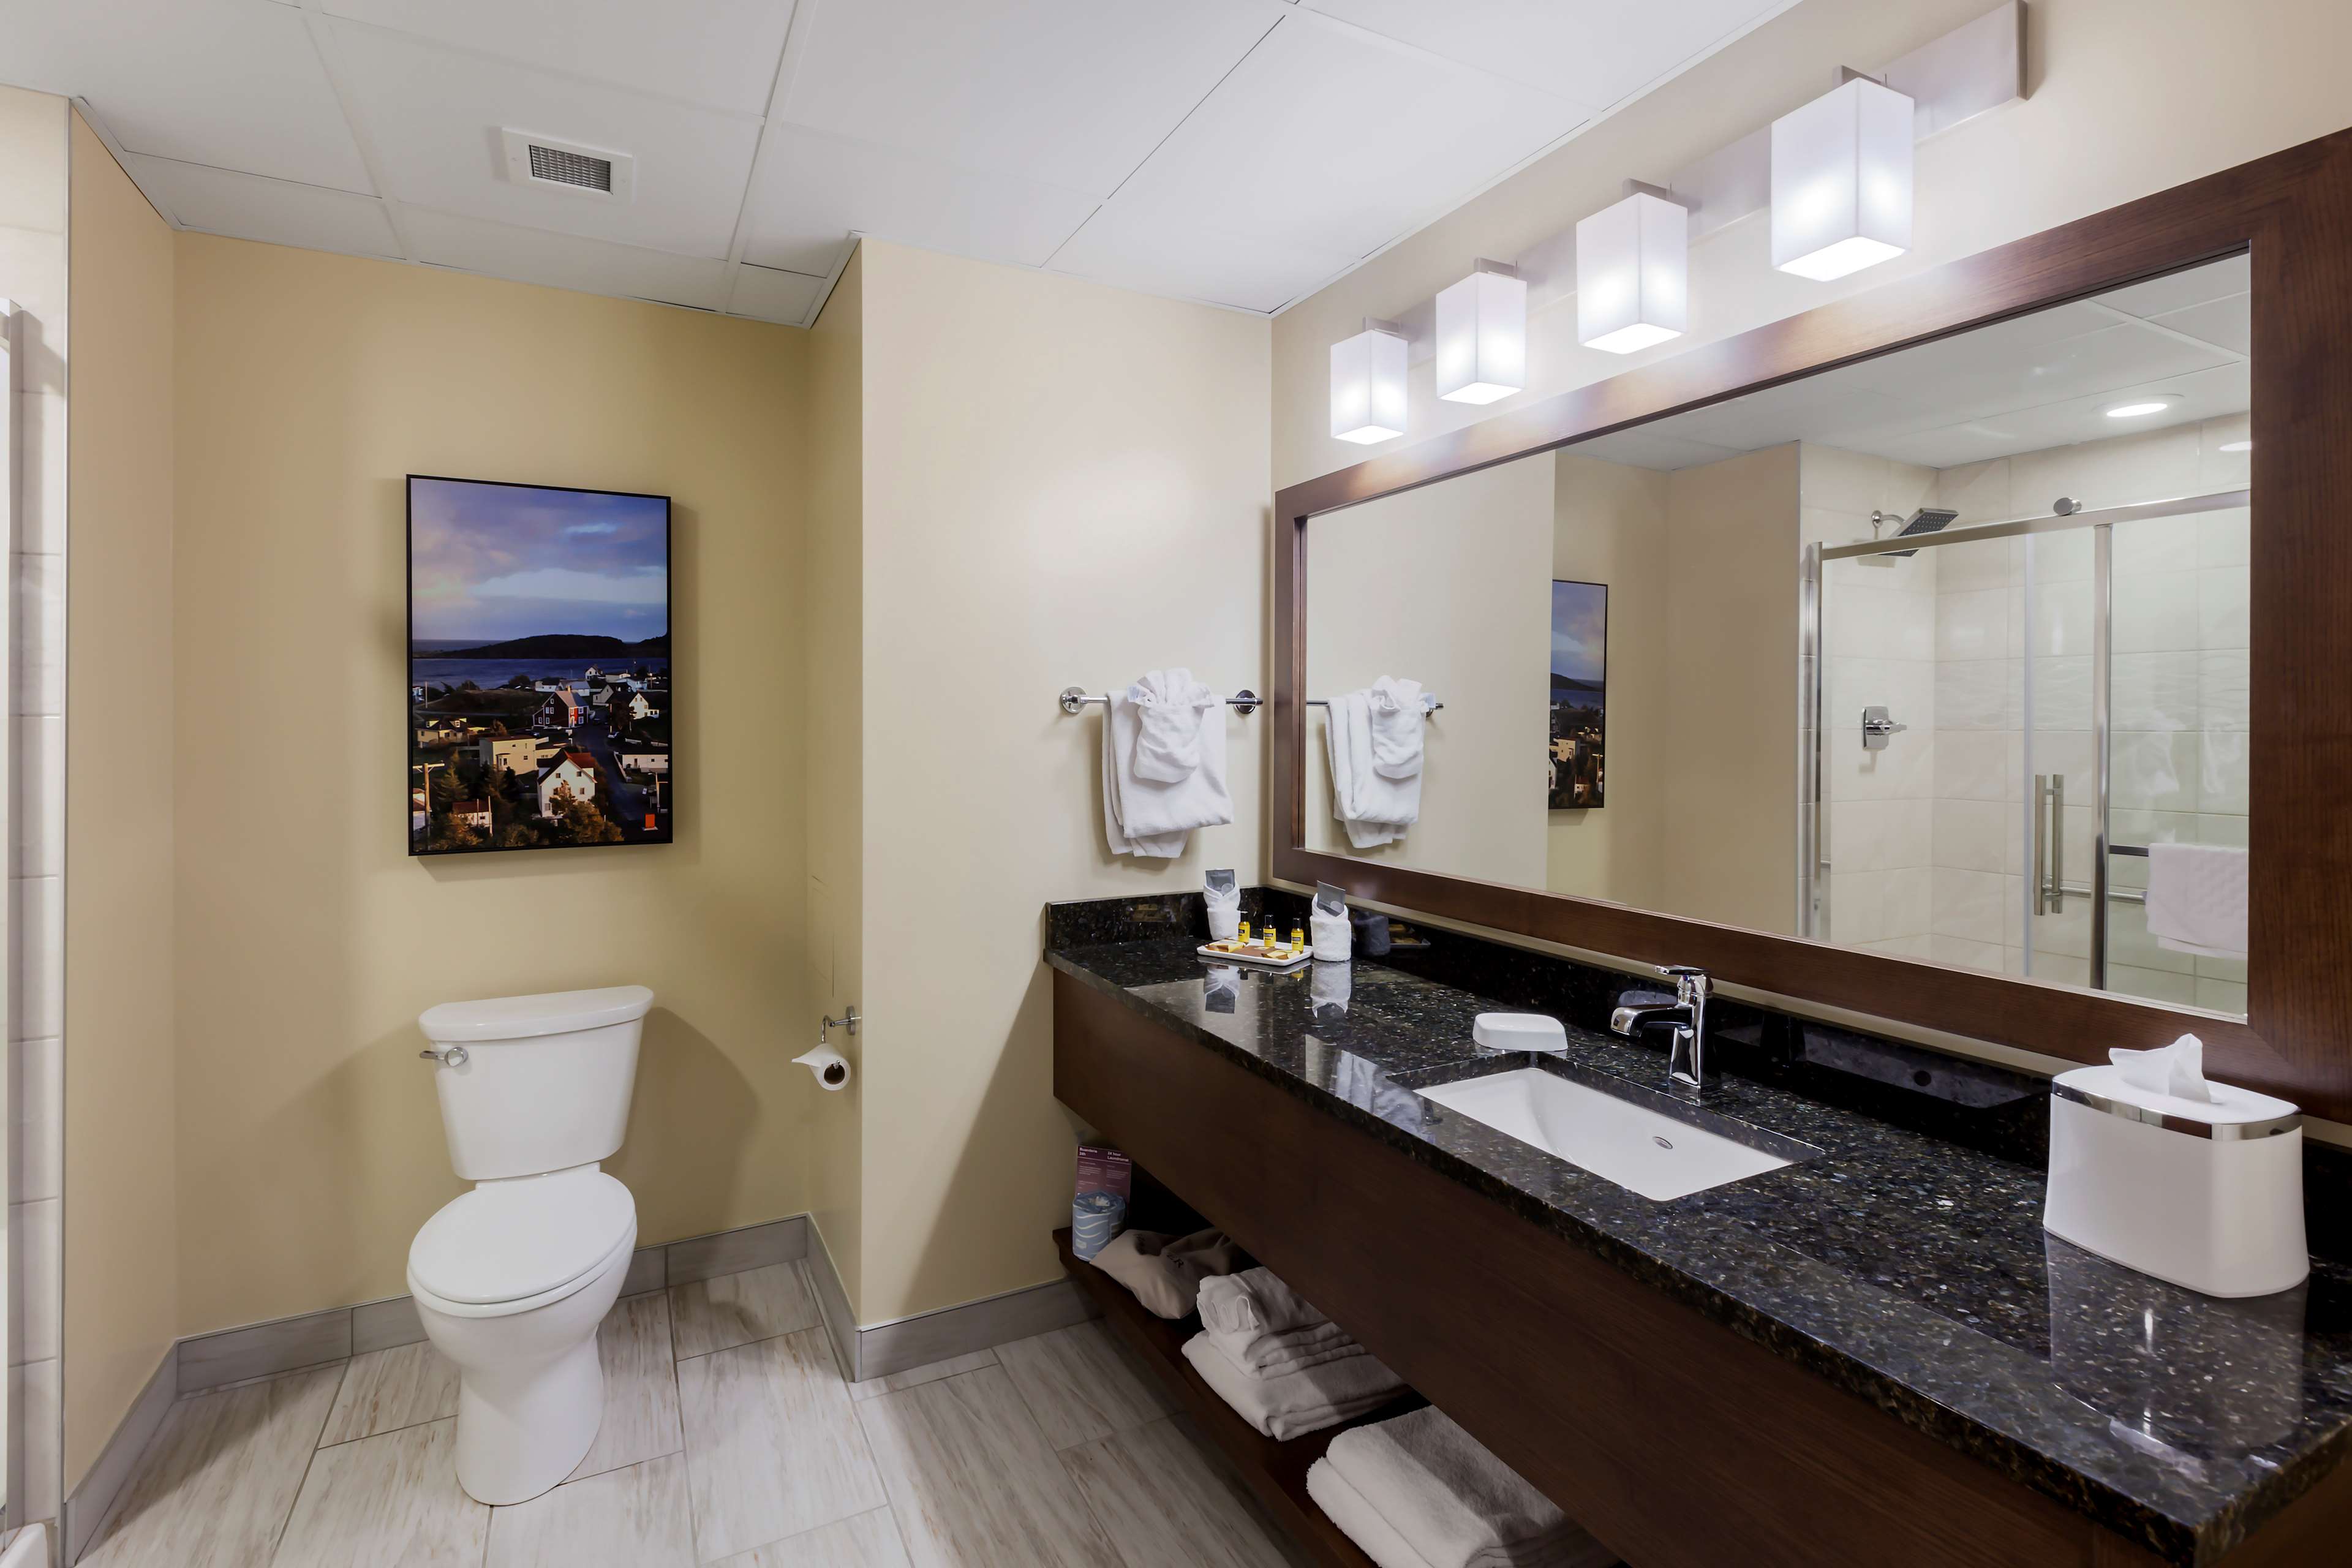 Images Best Western Plus St. John's Airport Hotel And Suites